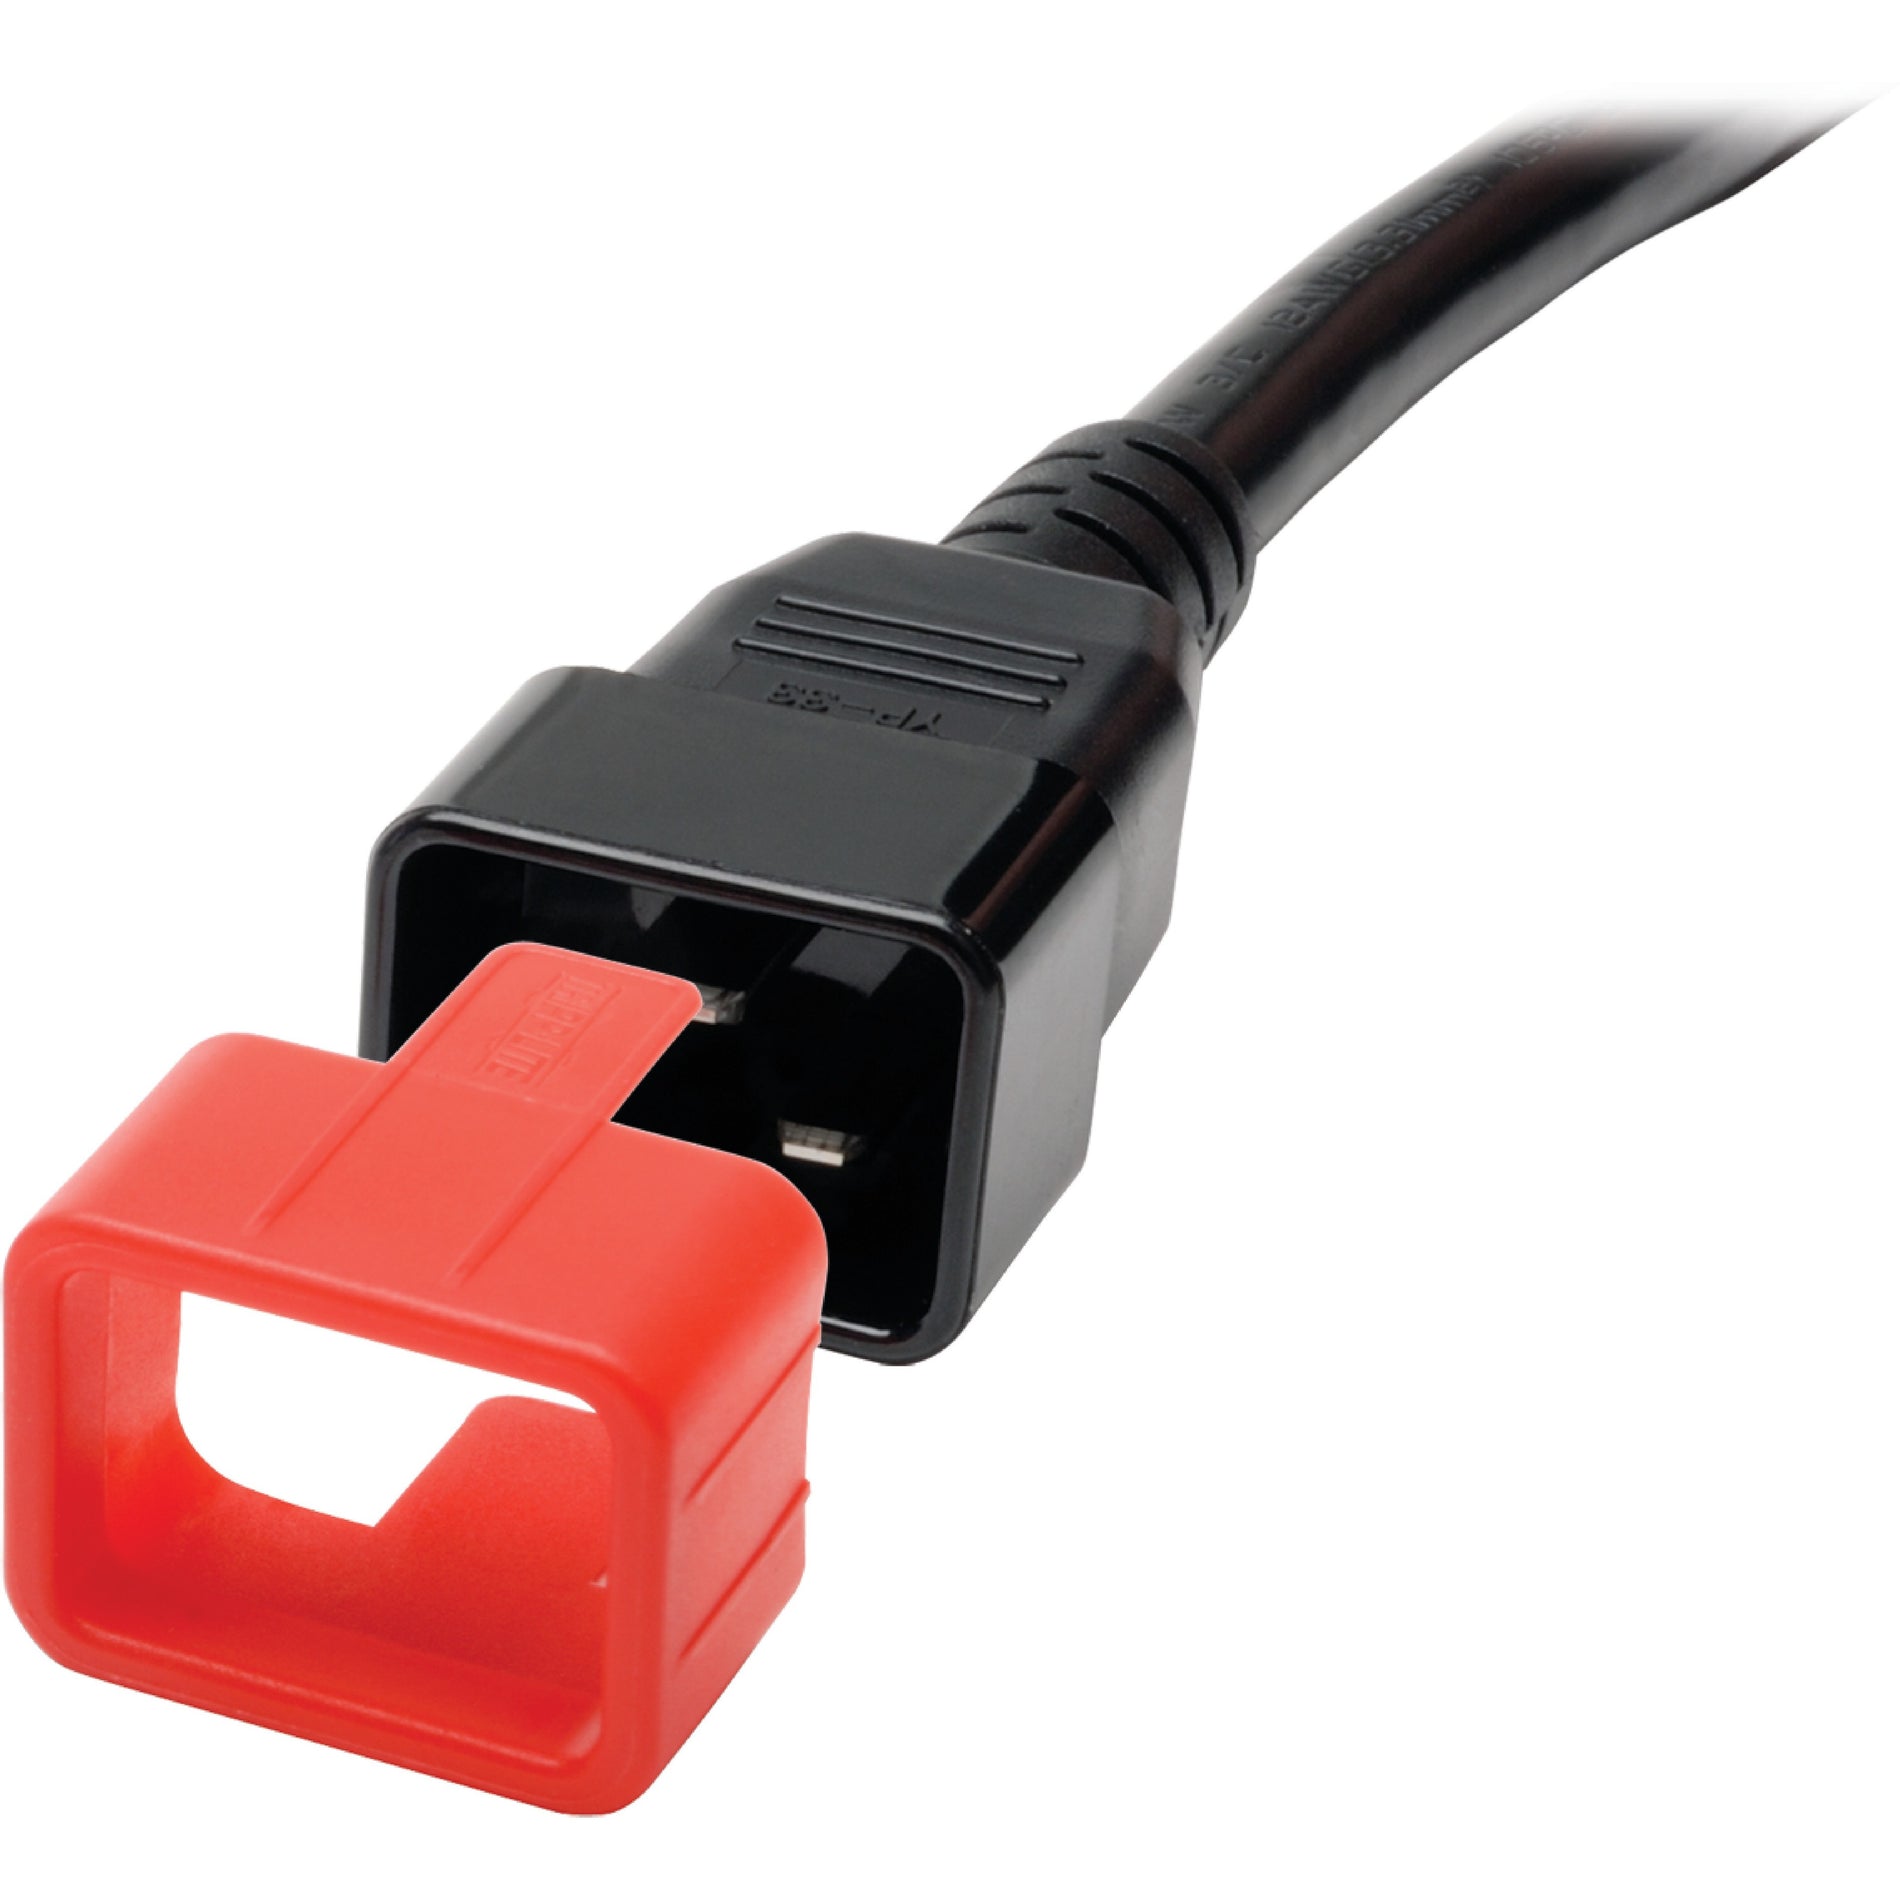 Tripp Lite by Eaton Plug-lock Inserts keep C20 power cords solidly connected to C19 outlets, RED color, Package of 100 (PLC19RD)